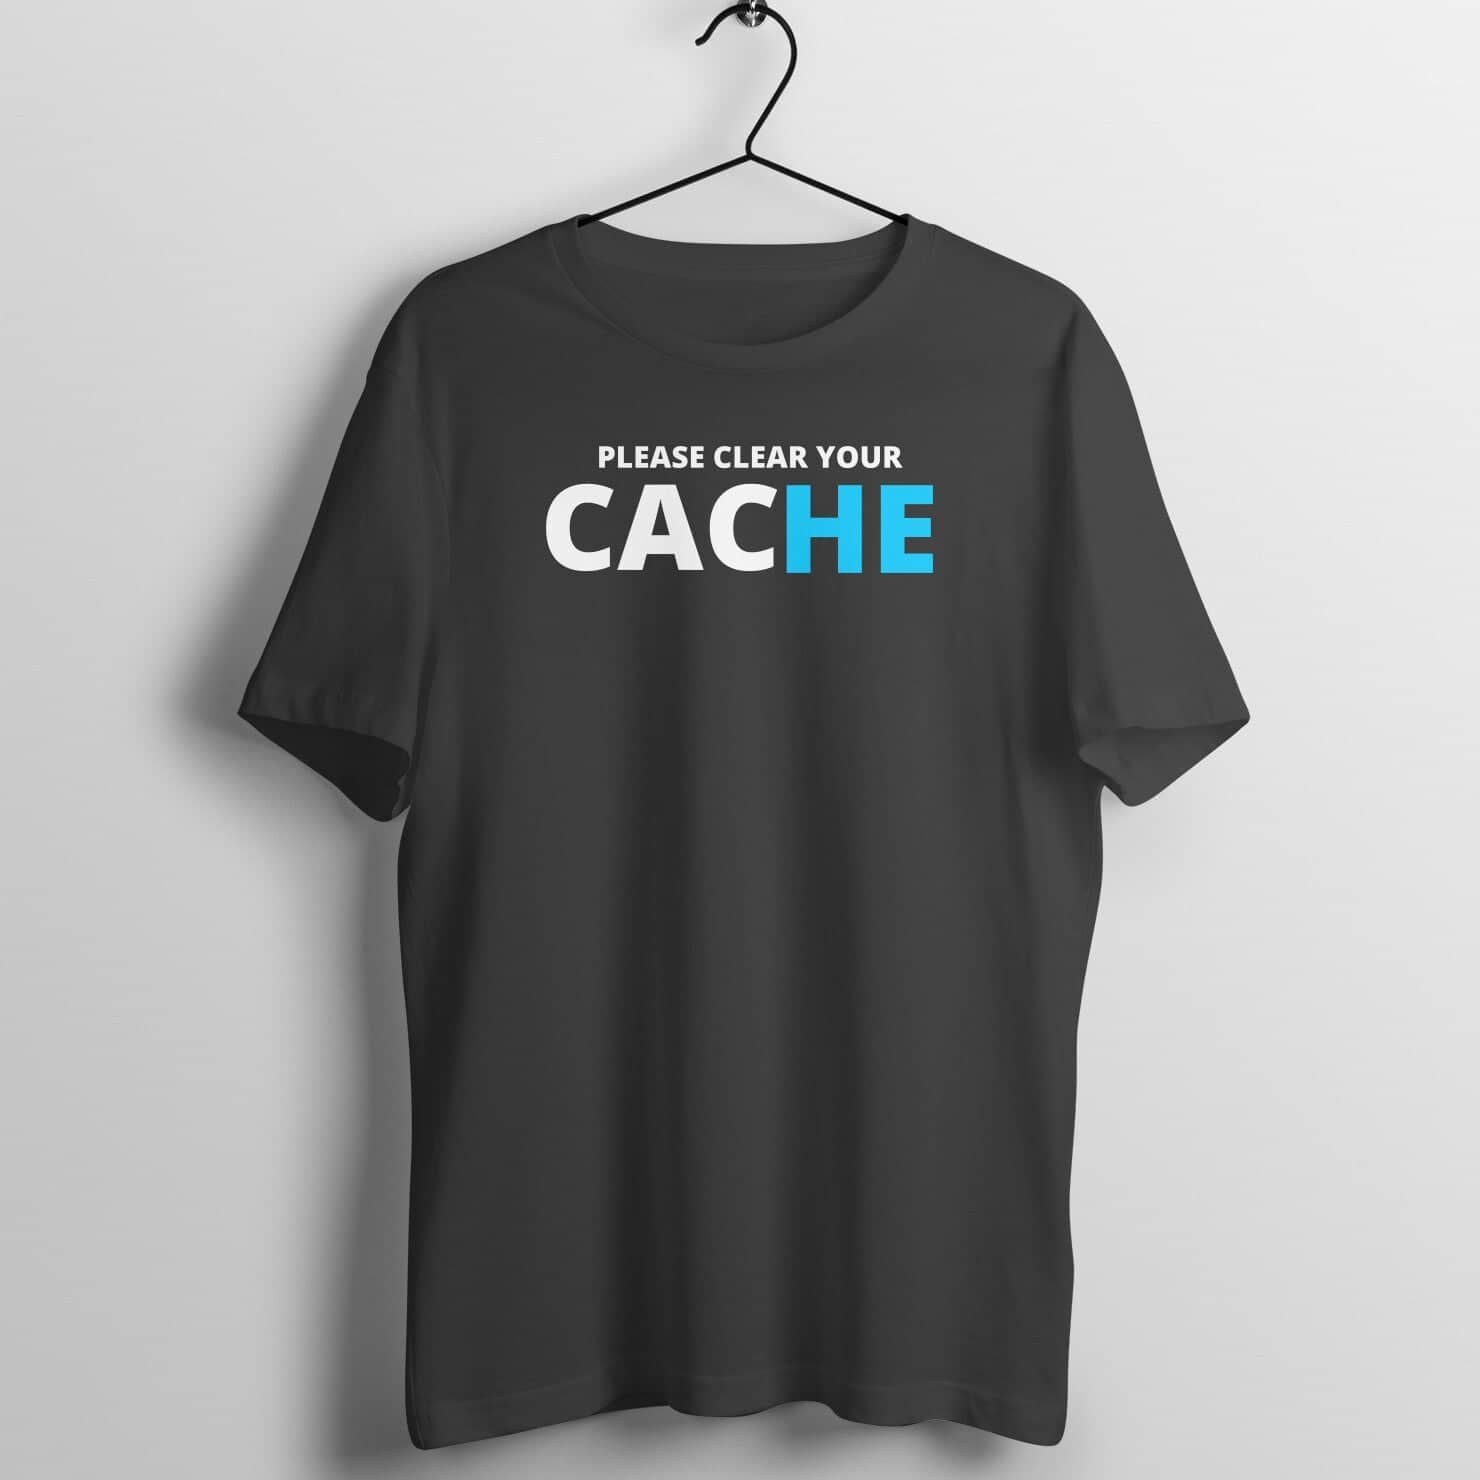 Please Clear Your Cache Exclusive T Shirt for Men and Women freeshipping - Catch My Drift India